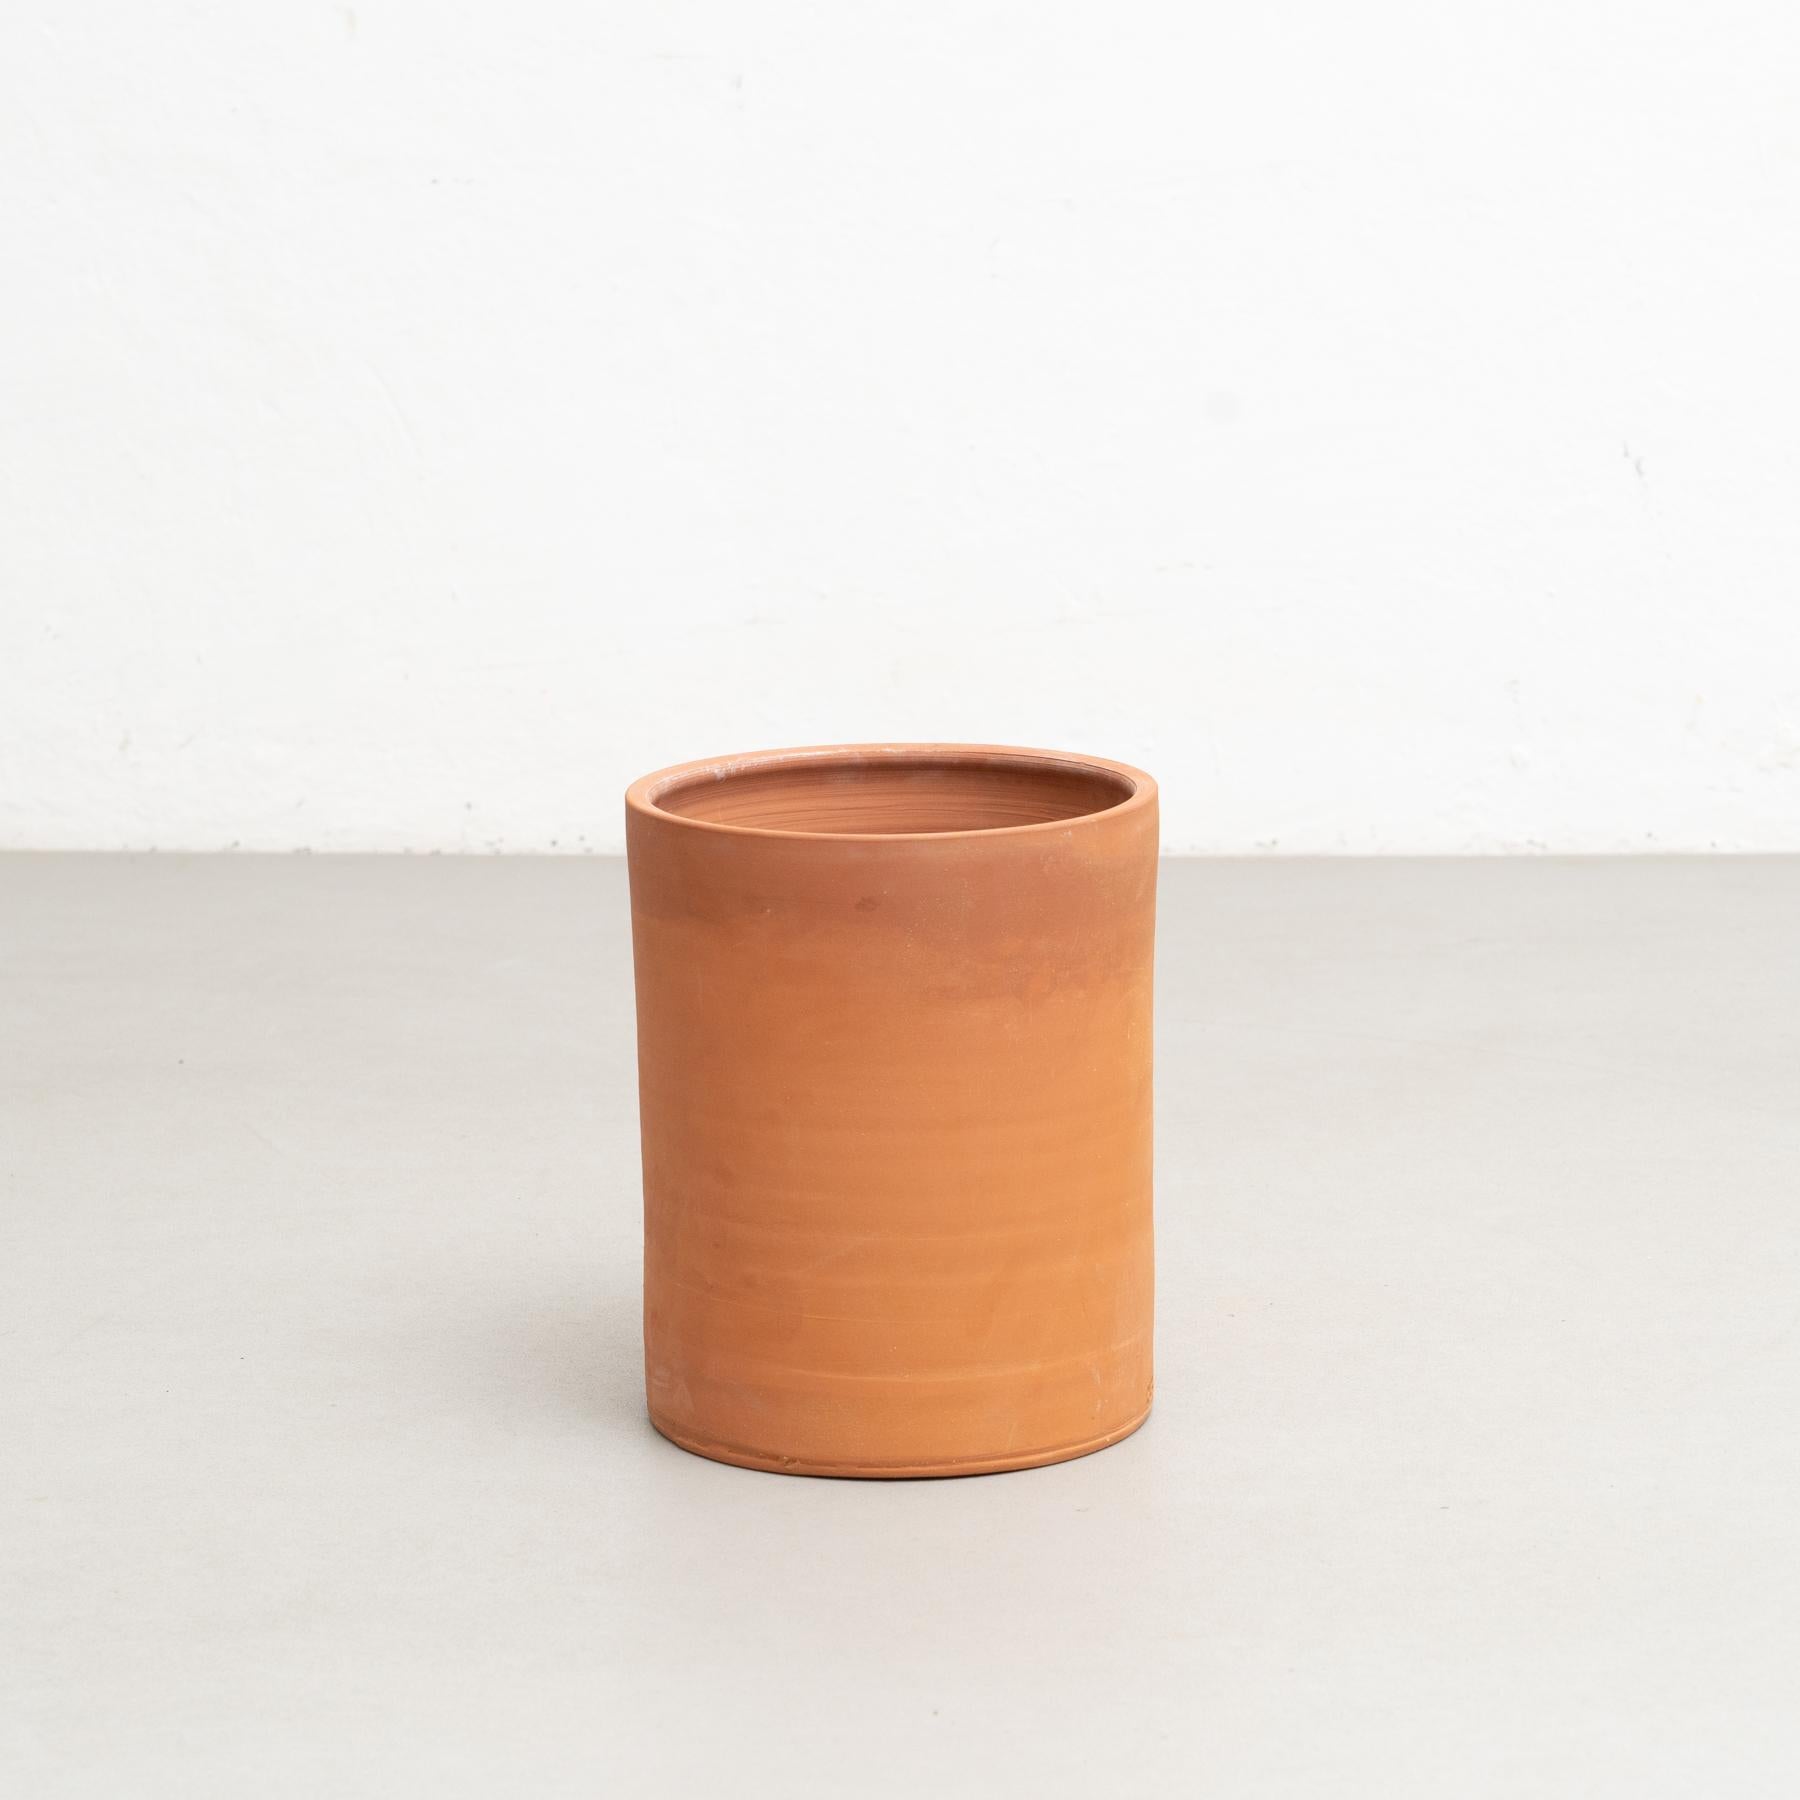 Traditional Catalan clay planter, circa 1960.

Manufactured in Spain.

In original condition, with minor wear consistent of age and use, preserving a beautiful patina.

Materials:
Clay.

